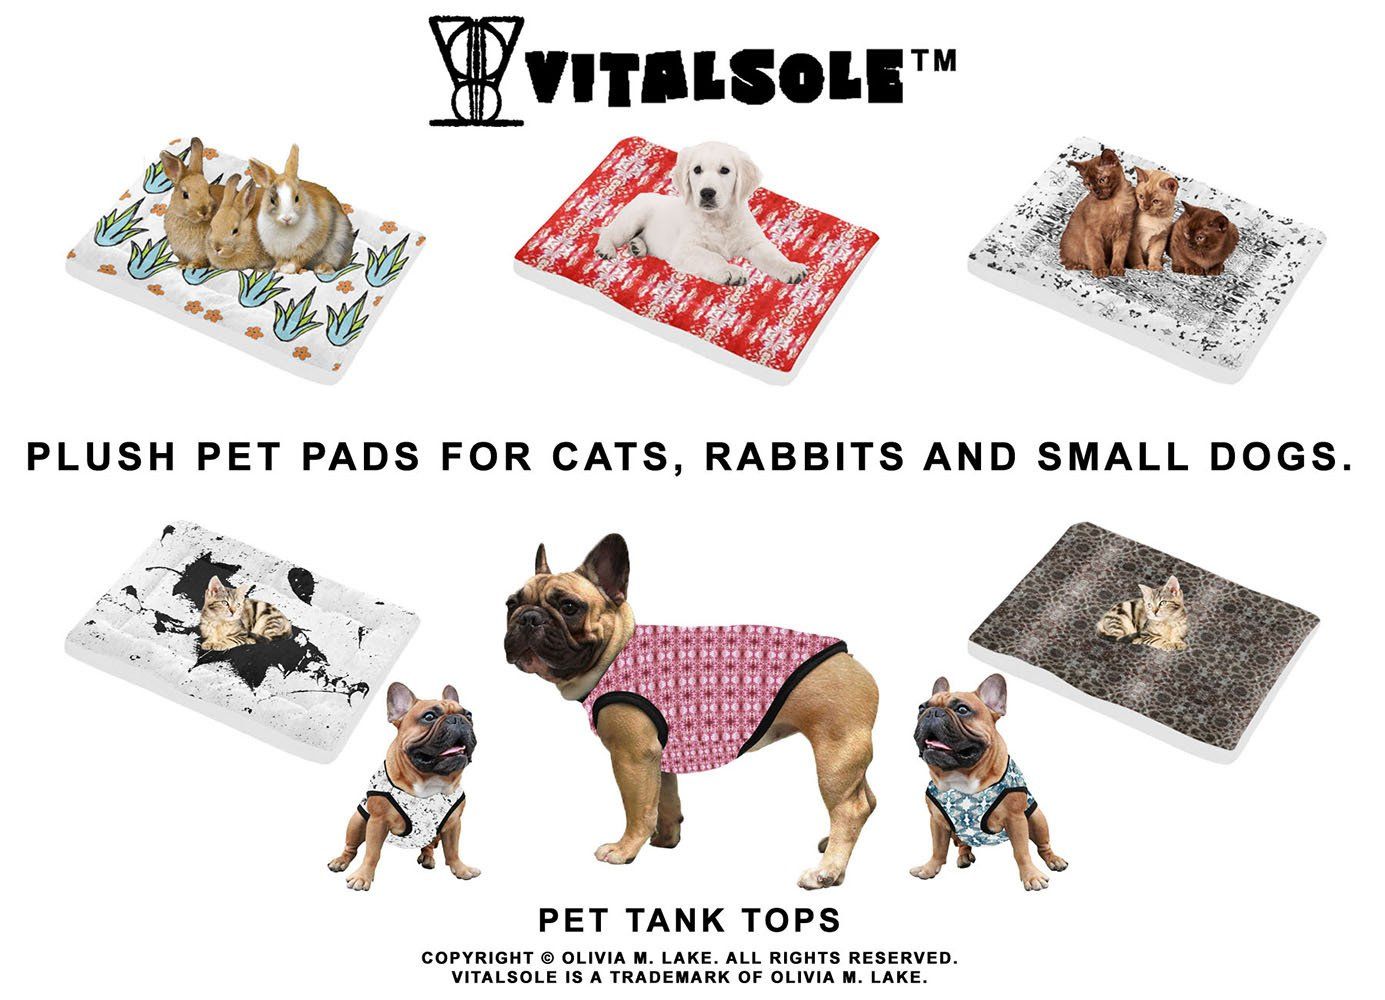 black vitalsole logo and tm with images of bunnys golden retriever and brown kittens on vitalsole plush pet pads below is black text saying plush pet pads for cats, rabbits and small dogs. below that are three images of small dogs wearing pet tank tops one white center one pink and last blue and on iether side of that are two images of pet pads with little striped kittens laying on them and text copyright notice at bottom of imagea white